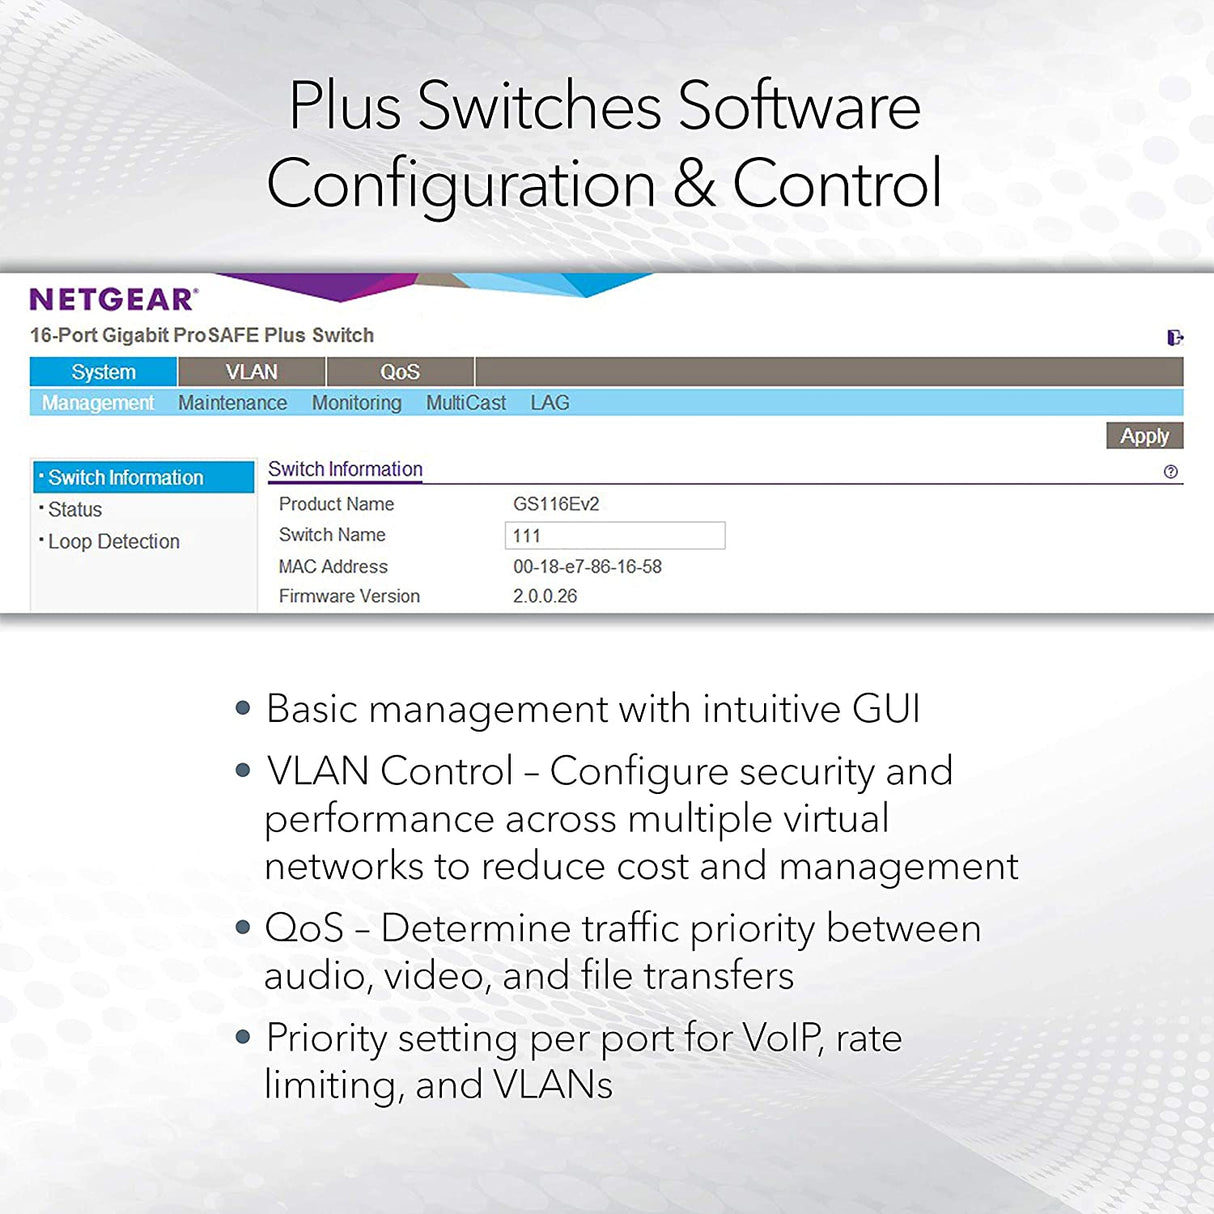 NETGEAR 24-Port 10G/Multi-Gigabit Plus Switch (XS724EM) - Managed, with 2 x 10G SFP+, Desktop or Rackmount, and Limited Lifetime Protection 24 port | 10G + Multi | 2xSFP+ | Managed